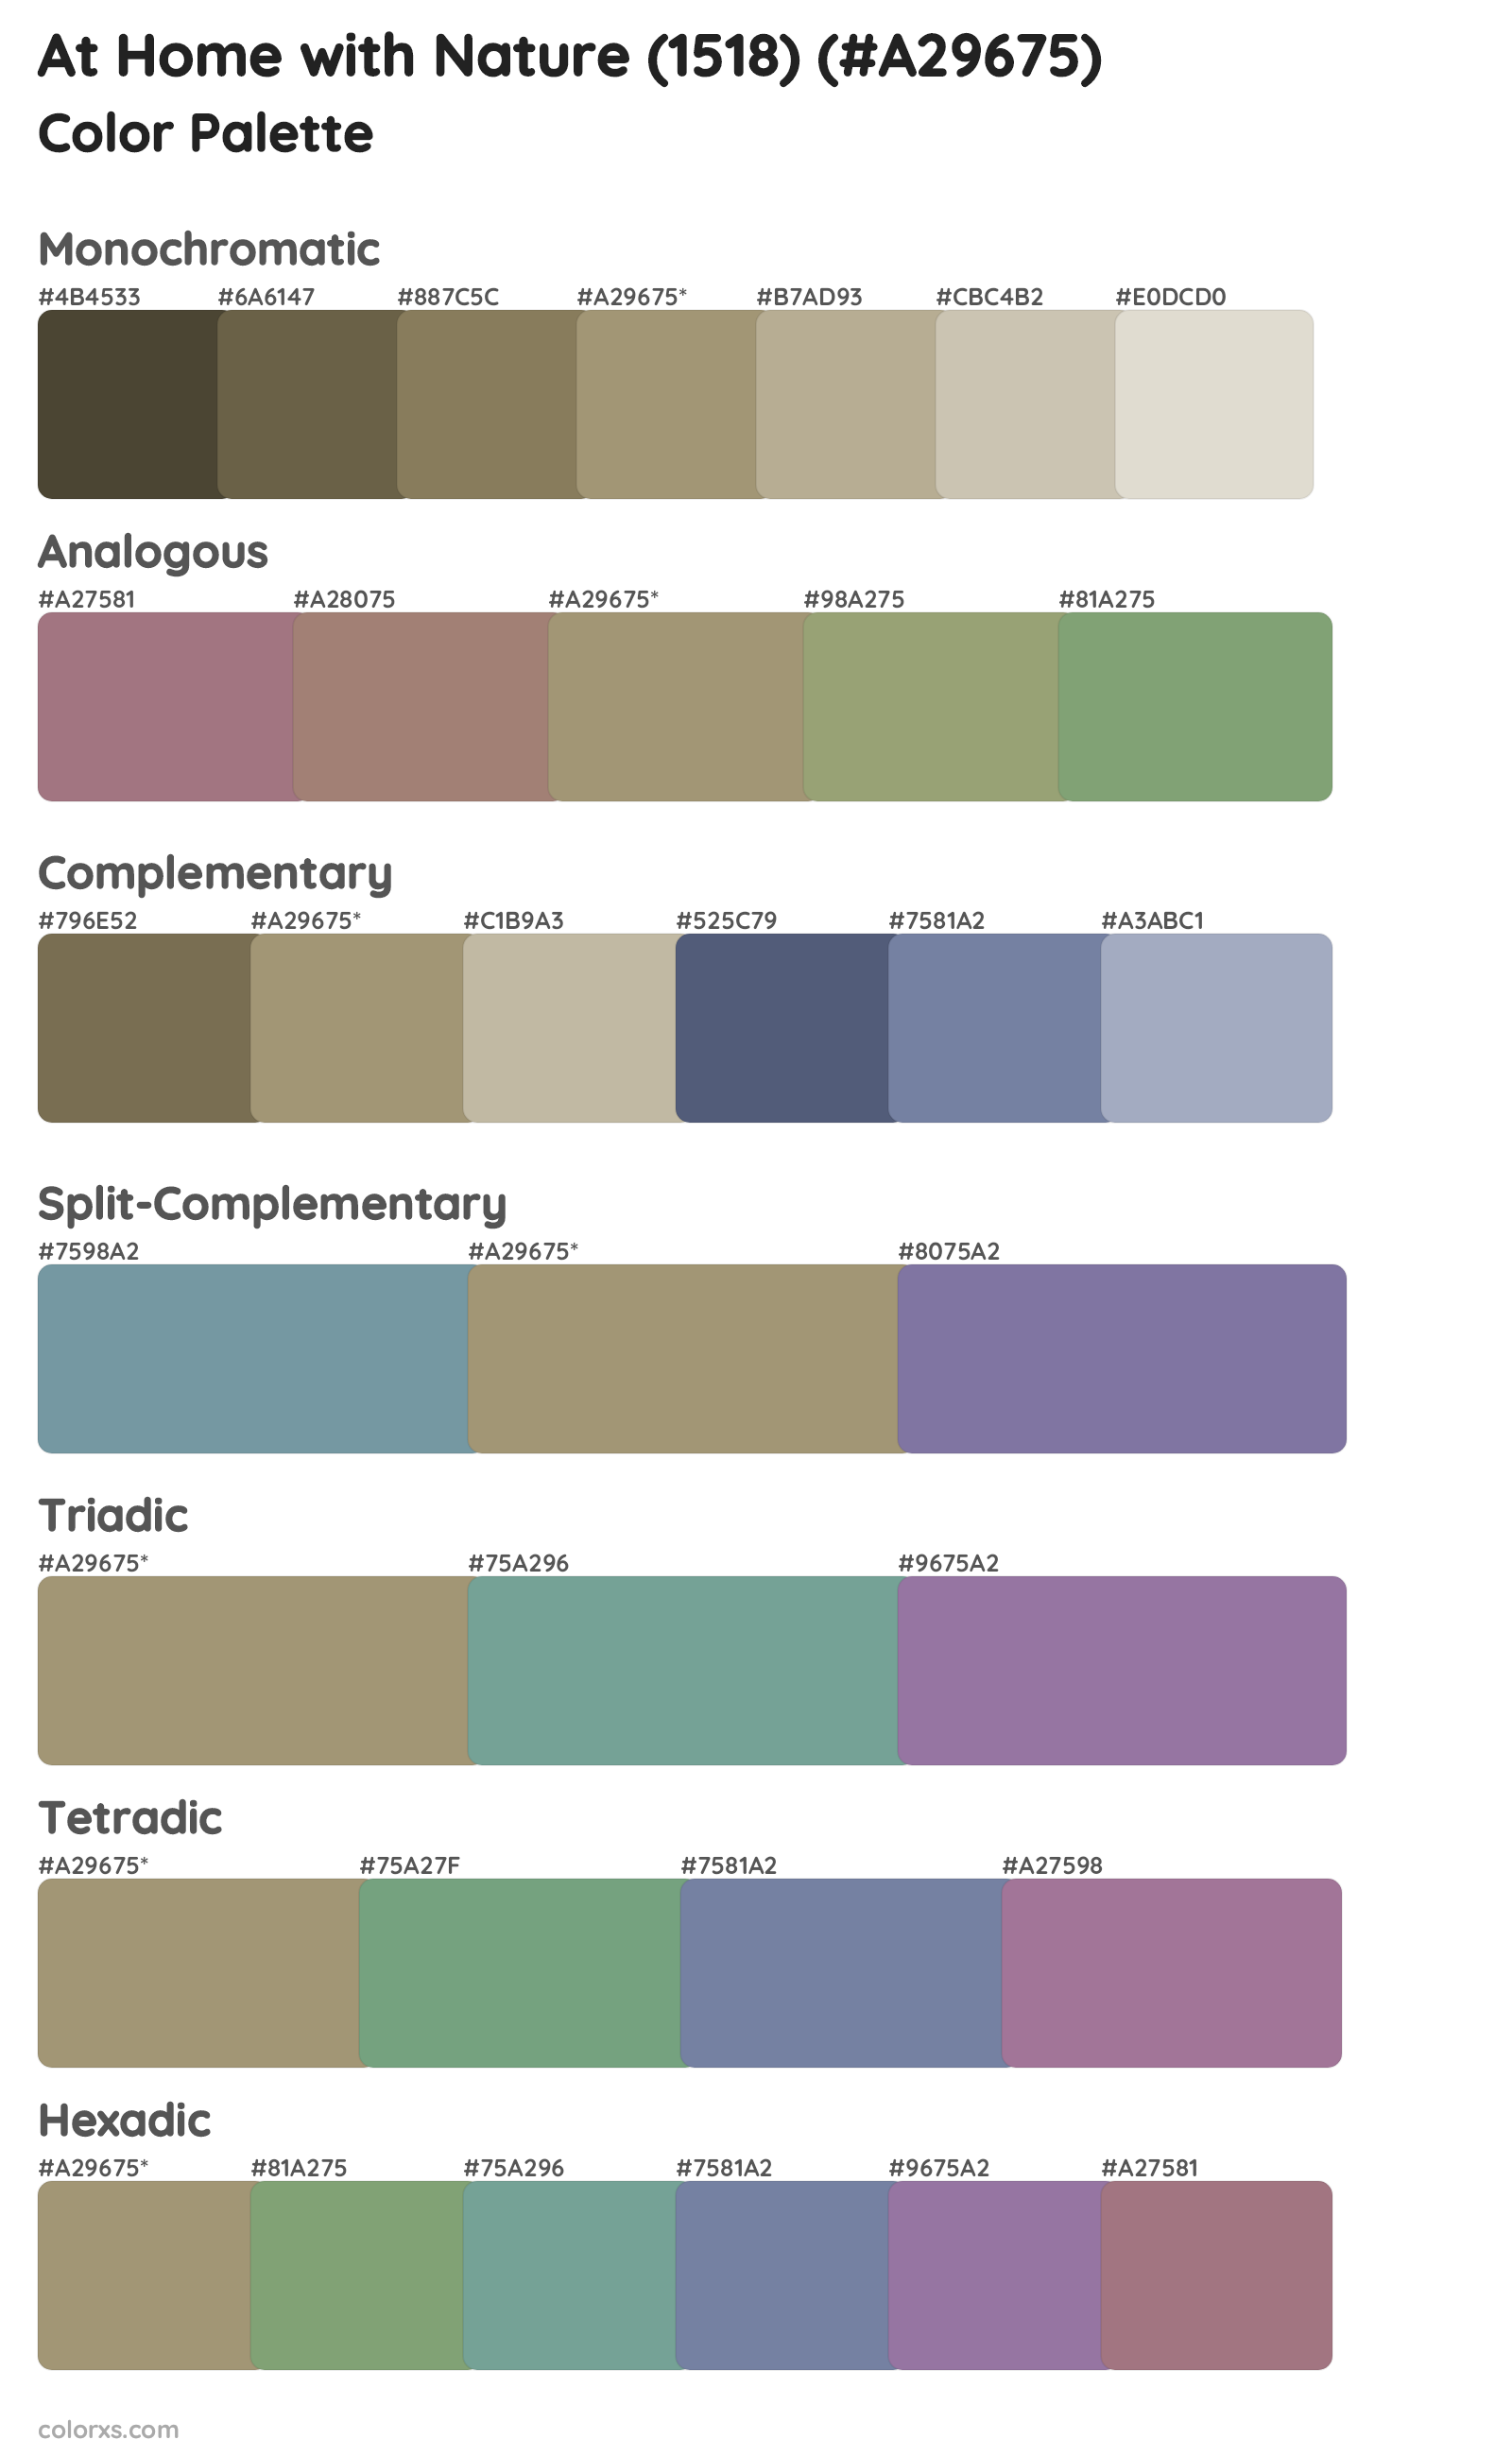 At Home with Nature (1518) Color Scheme Palettes